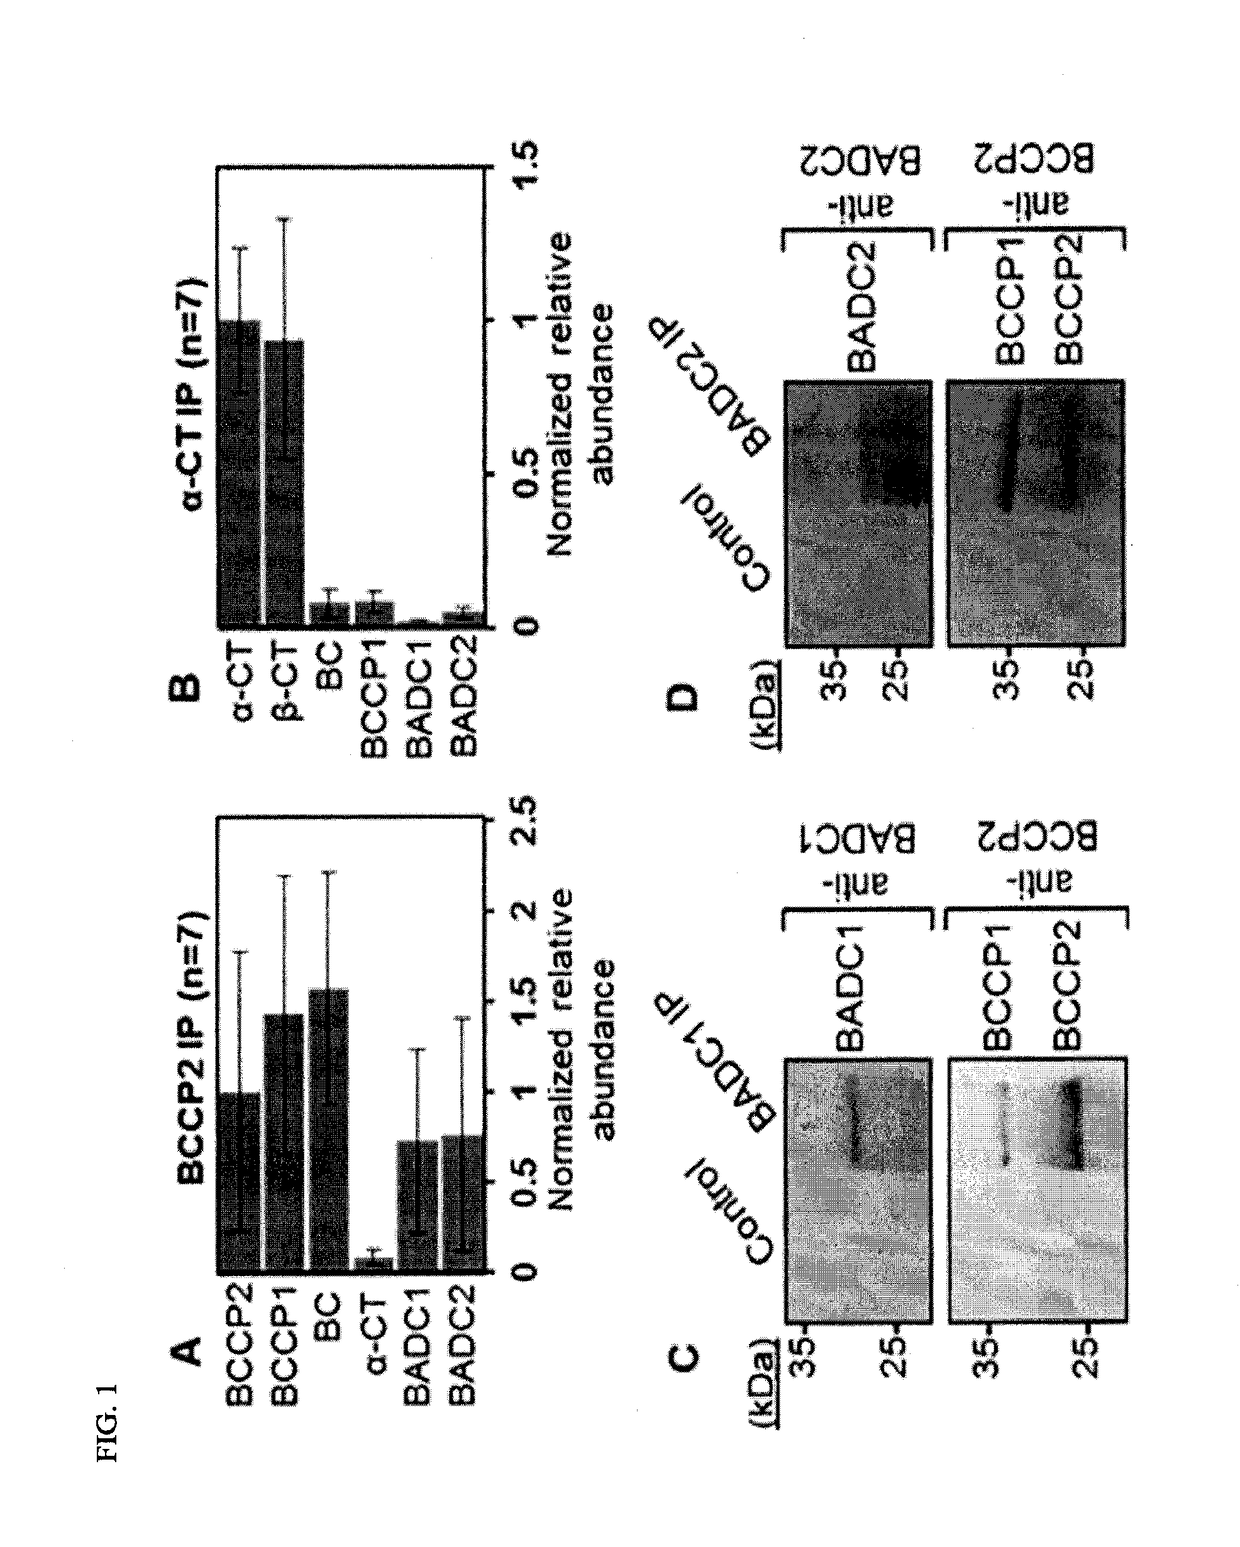 Increasing plant oil content by altering a negative regulator of acetyl-coa carboxylase